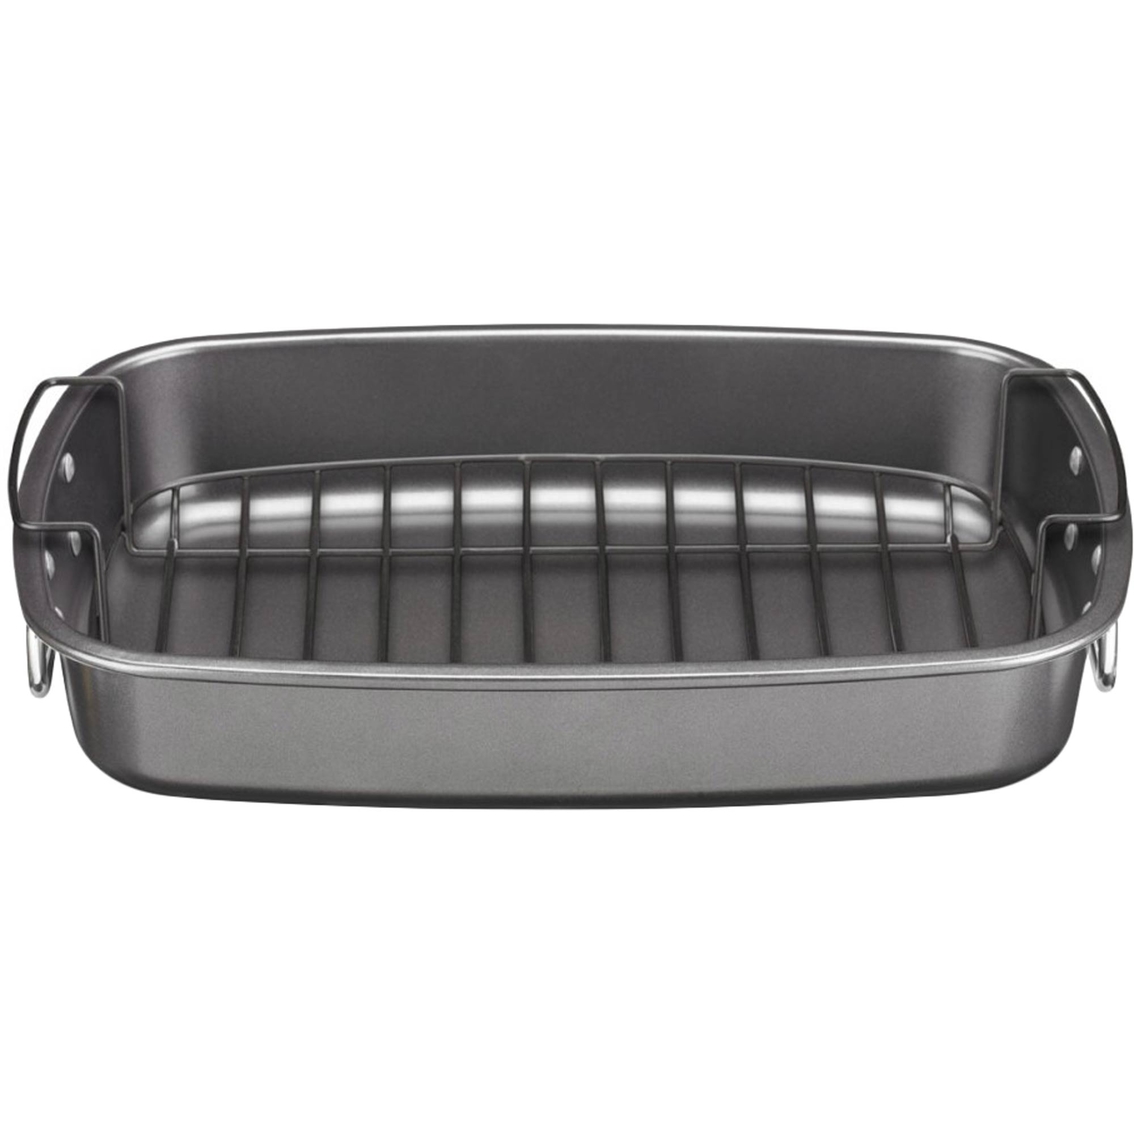 Cuisinart Ovenware Classic Collection Carbon Steel Roaster with Rack 17 x 12 in. - Image 1 of 2